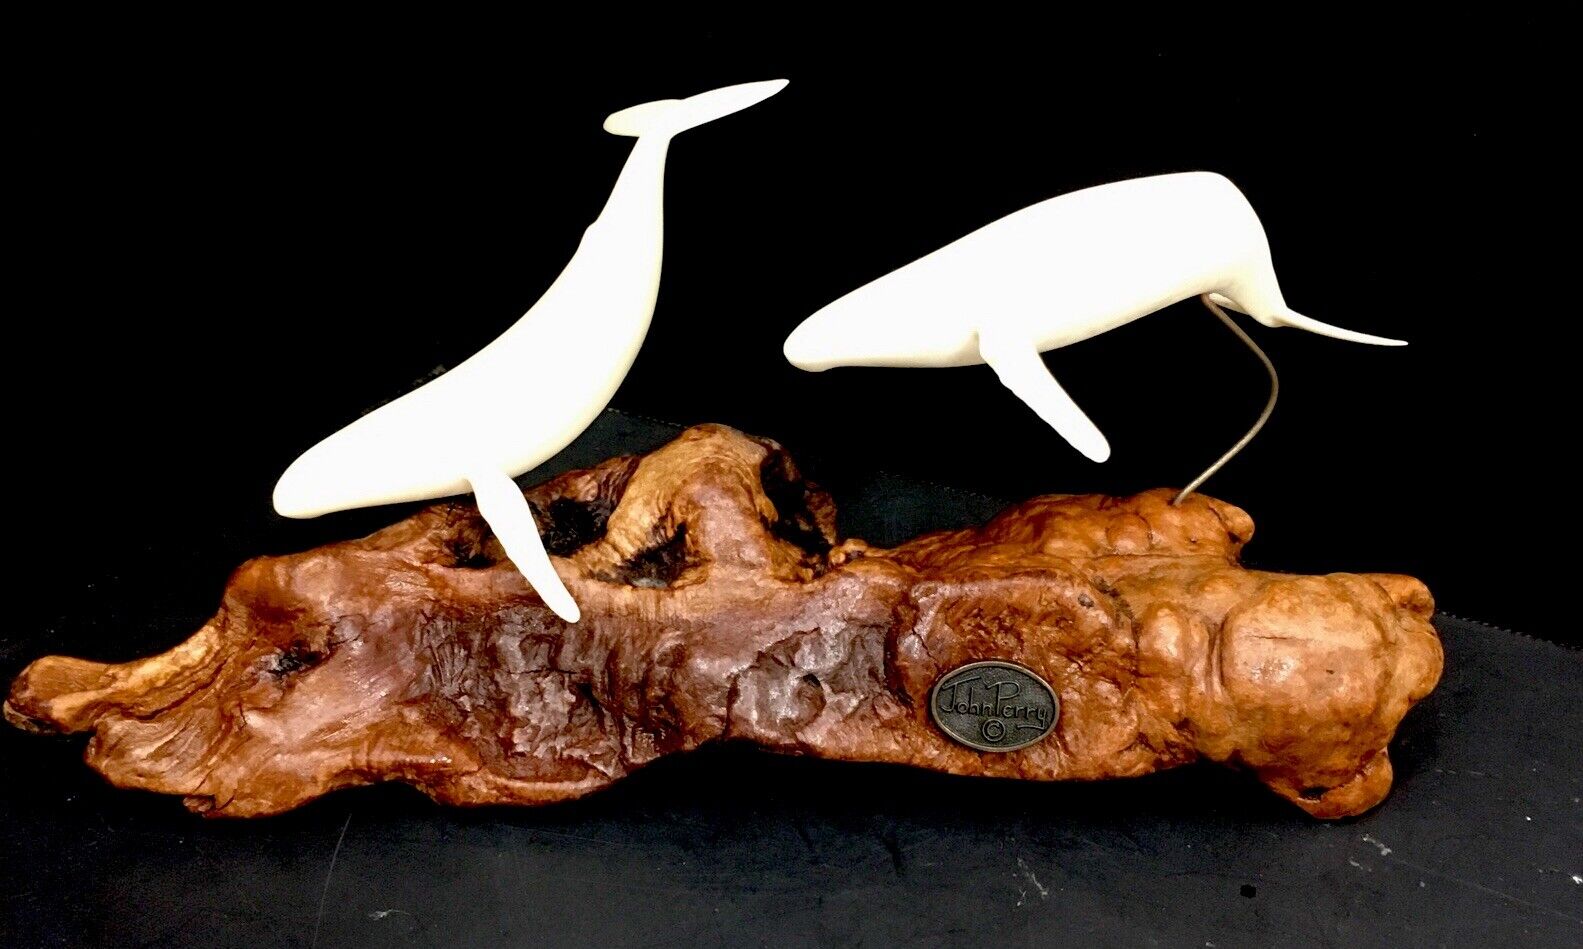 John Perry 2 White Whales Sculpture on Burl Wood